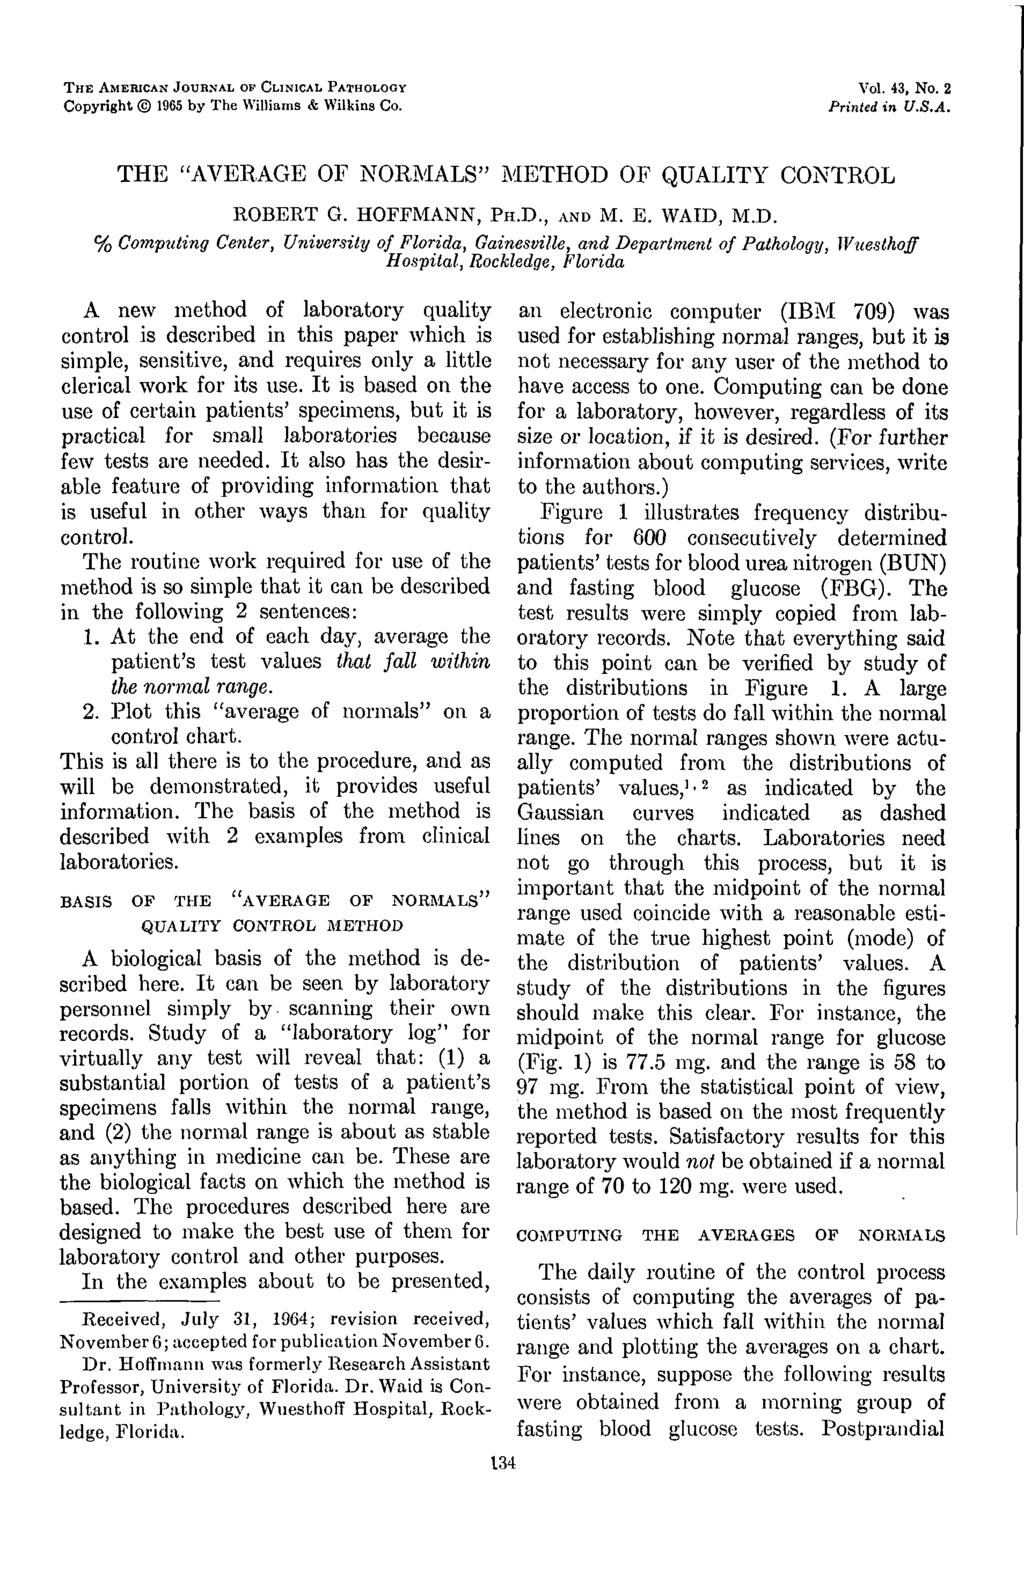 THE AMERICAN JOURNAL OF CLINICAL PATHOLOGY Copyright 1965 by The Williams & Wilkins Co. Vol. 43, No. 2 Printed in U.S.A. THE "AVERAGE OF NORMALS" METHOD OF QUALITY CONTROL ROBERT G. HOFFMANN, PH.D., AND M.